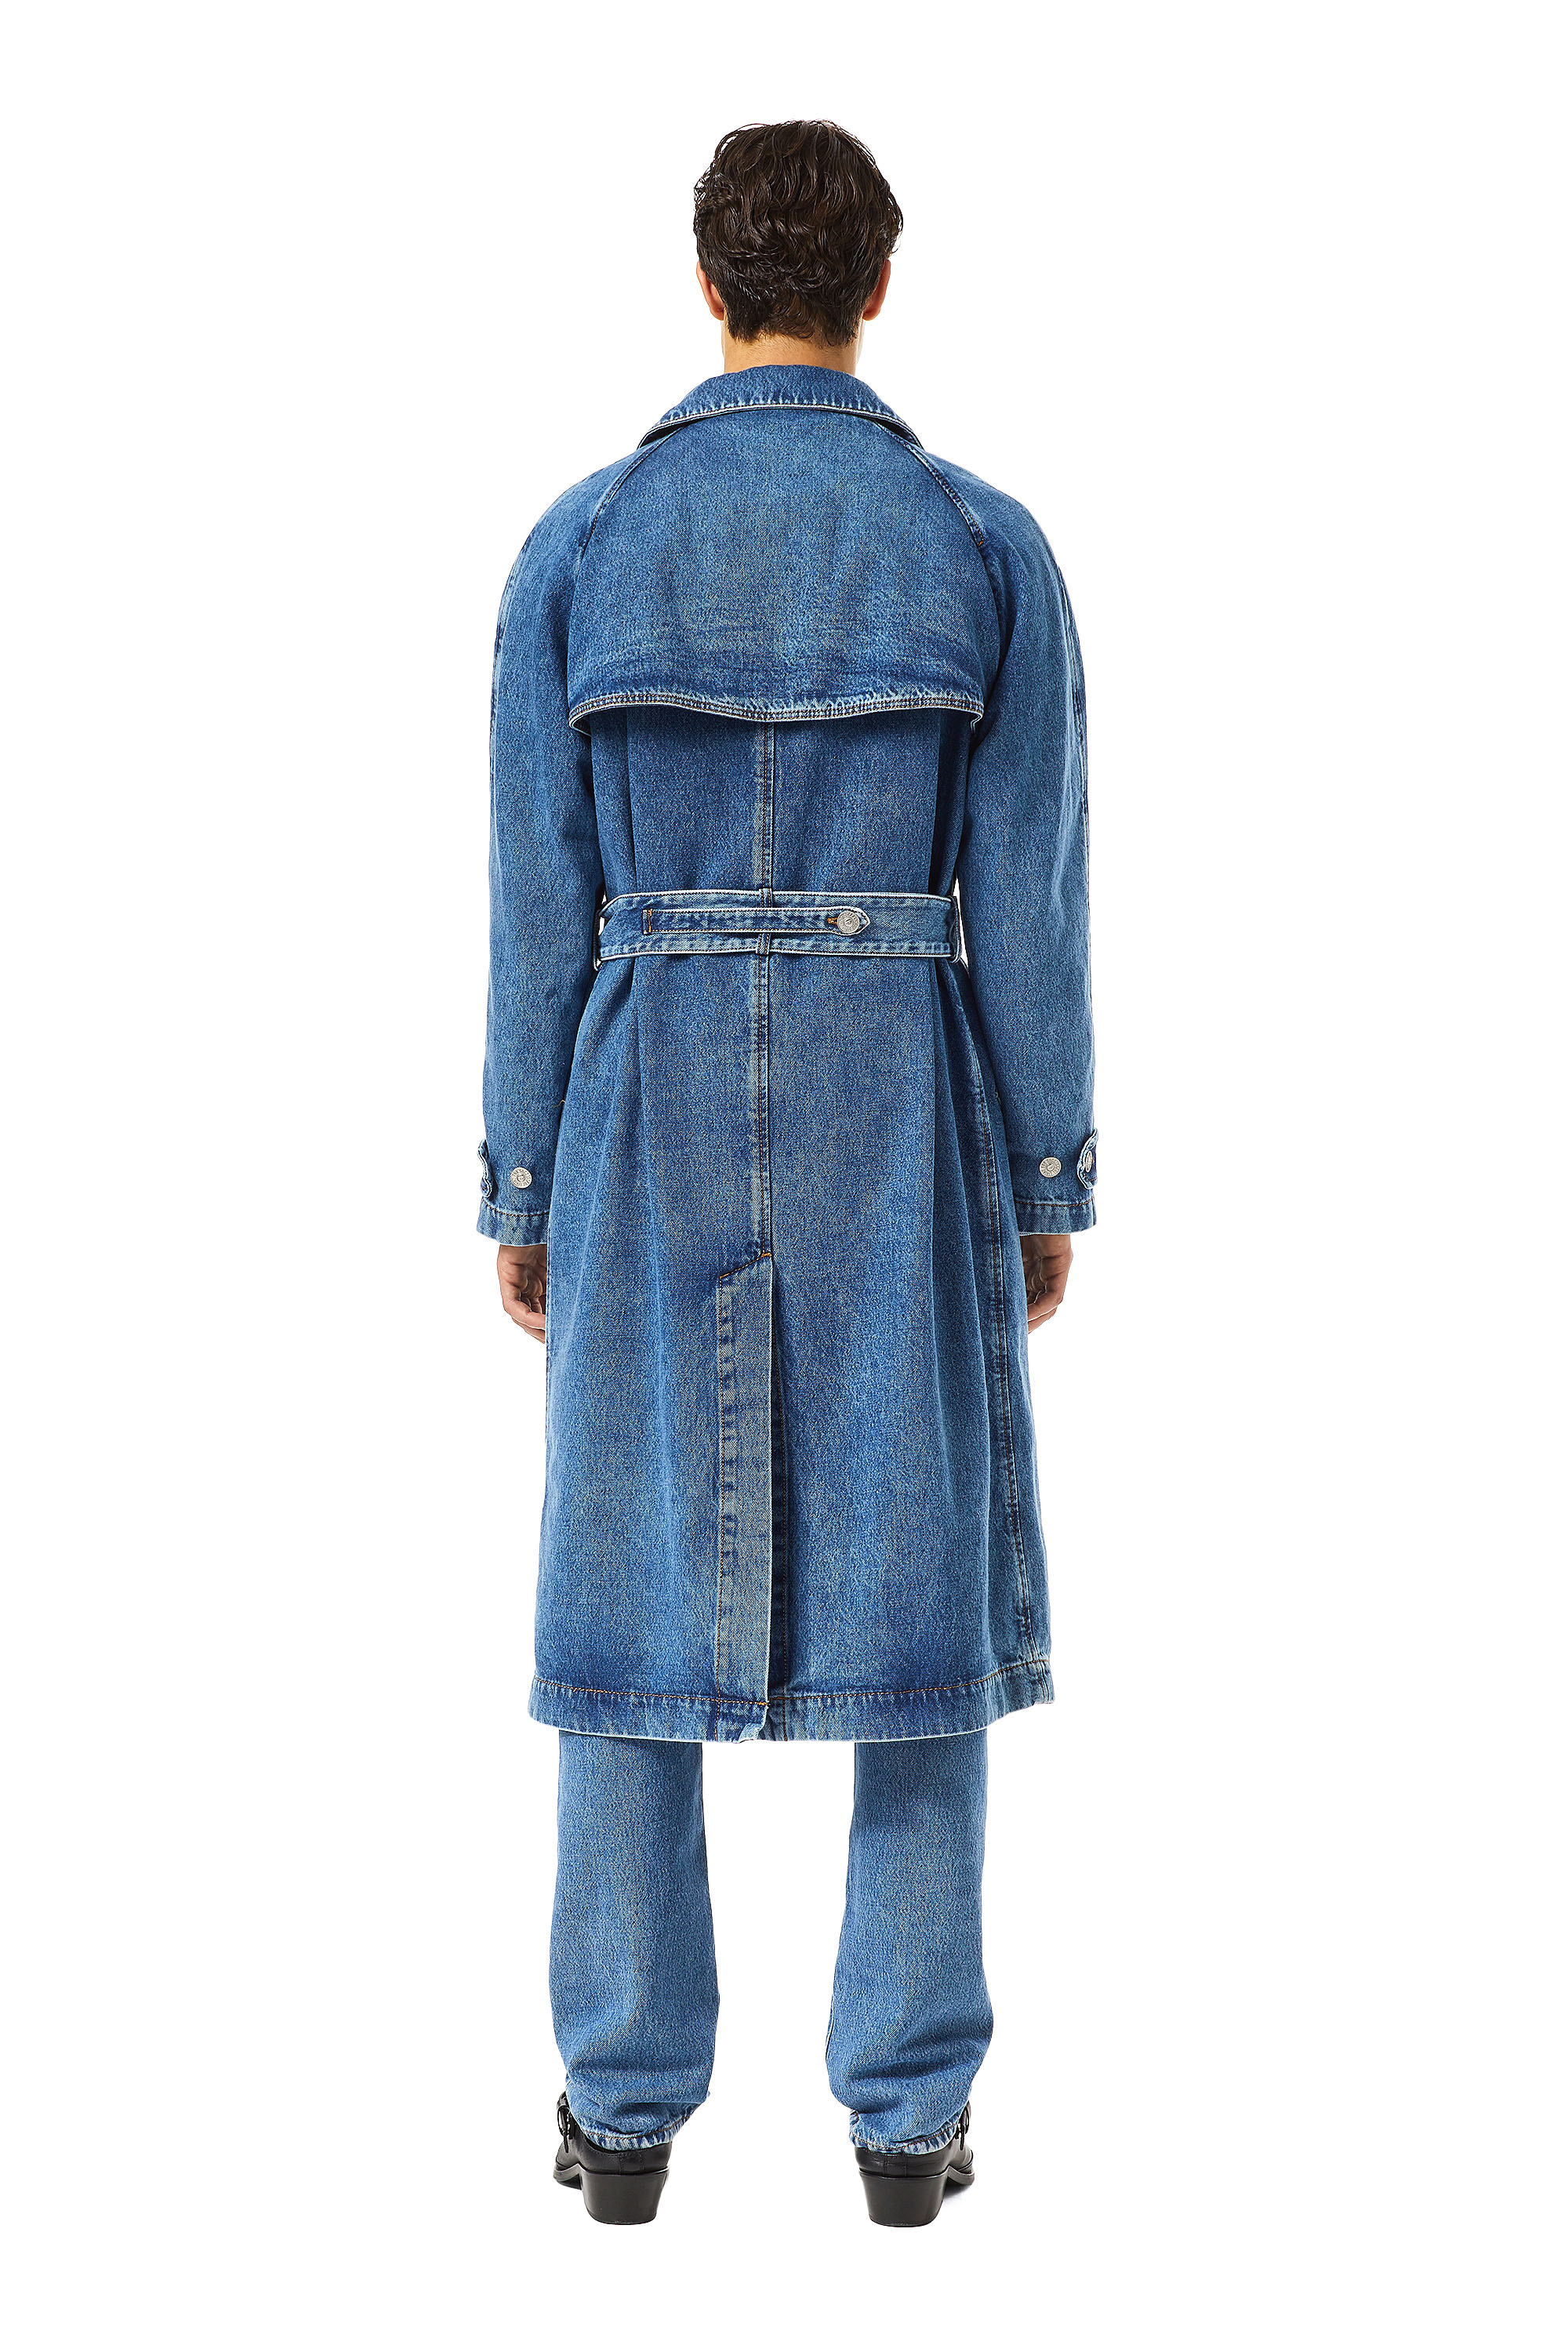 Diesel - D-DELIRIOUS DOUBLE BREASTED TRENCH COAT, Unisex Trench coat in denim in Blue - Image 3